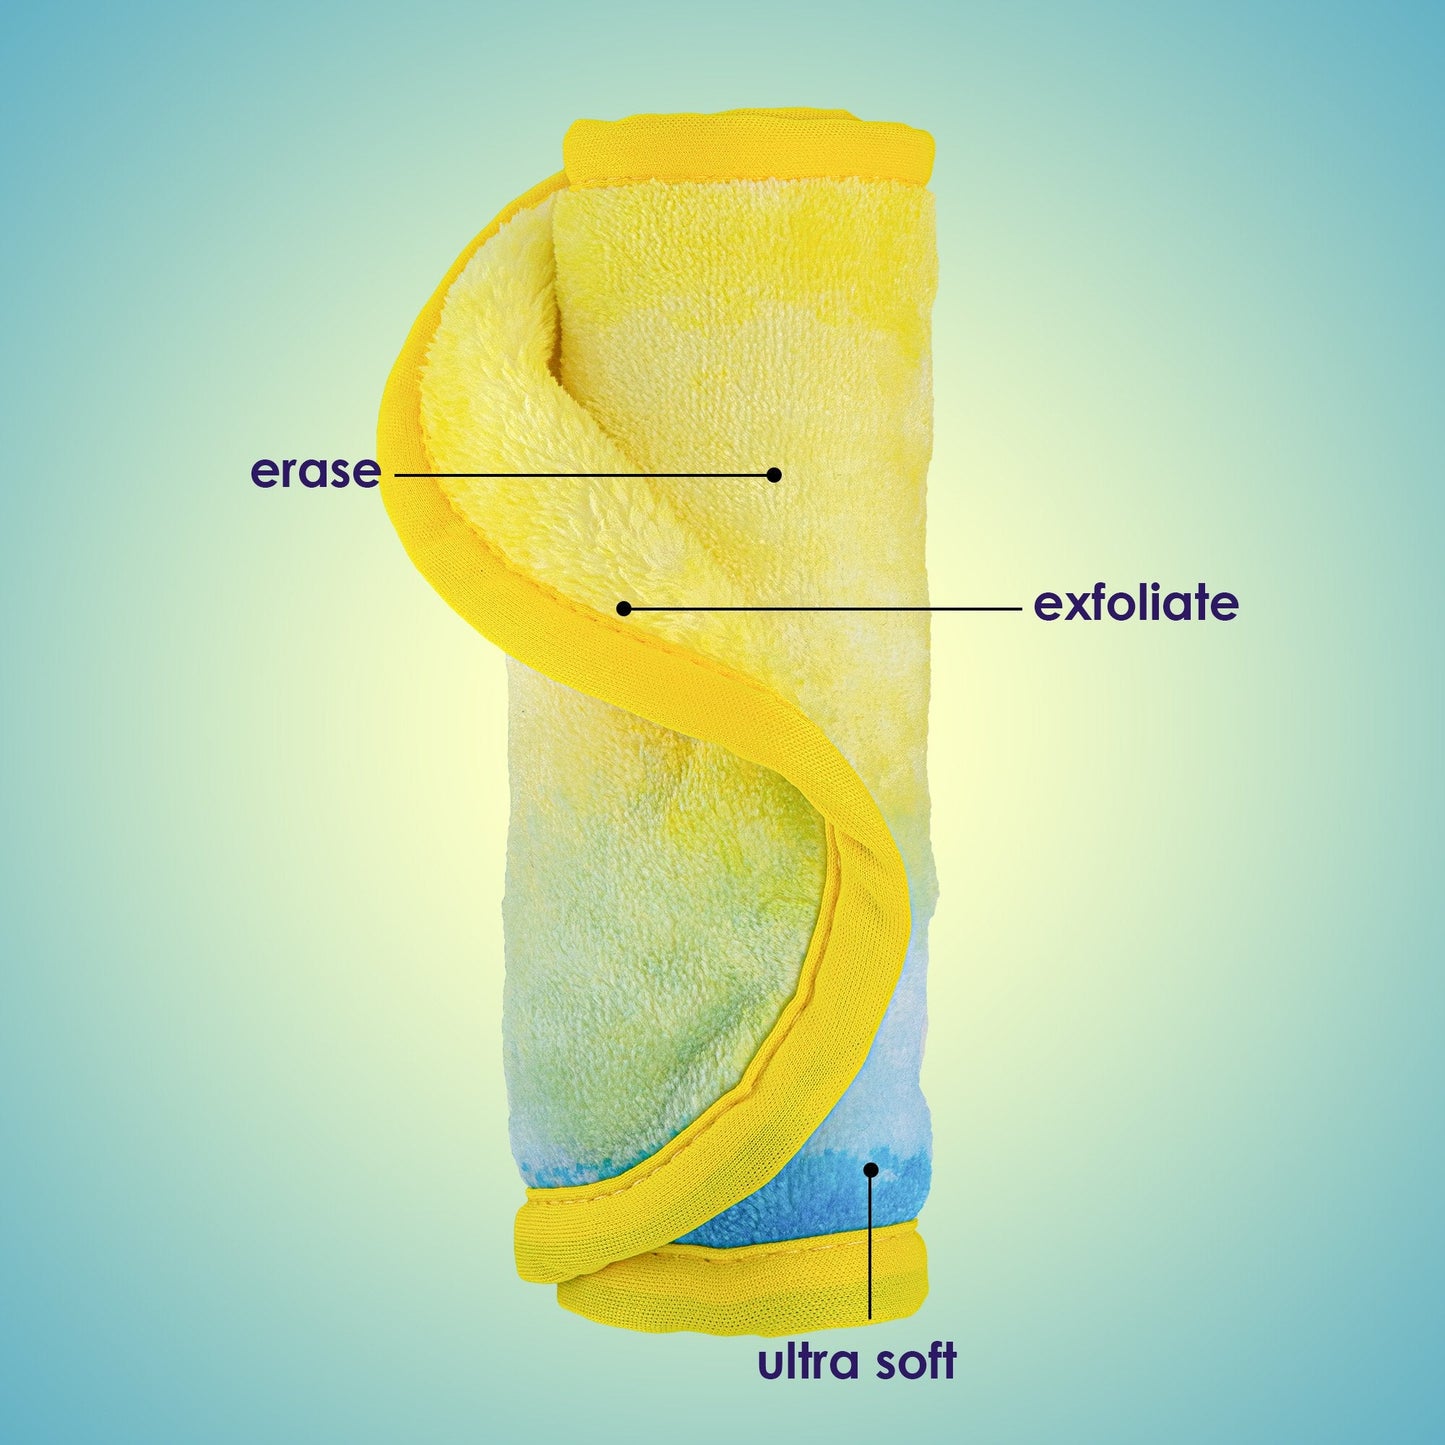 Rolled up charity: water MakeUp Eraser with both sides exposed. The short fiber side is labeled as erase, and the long fiber side is labeled as exfoliate.